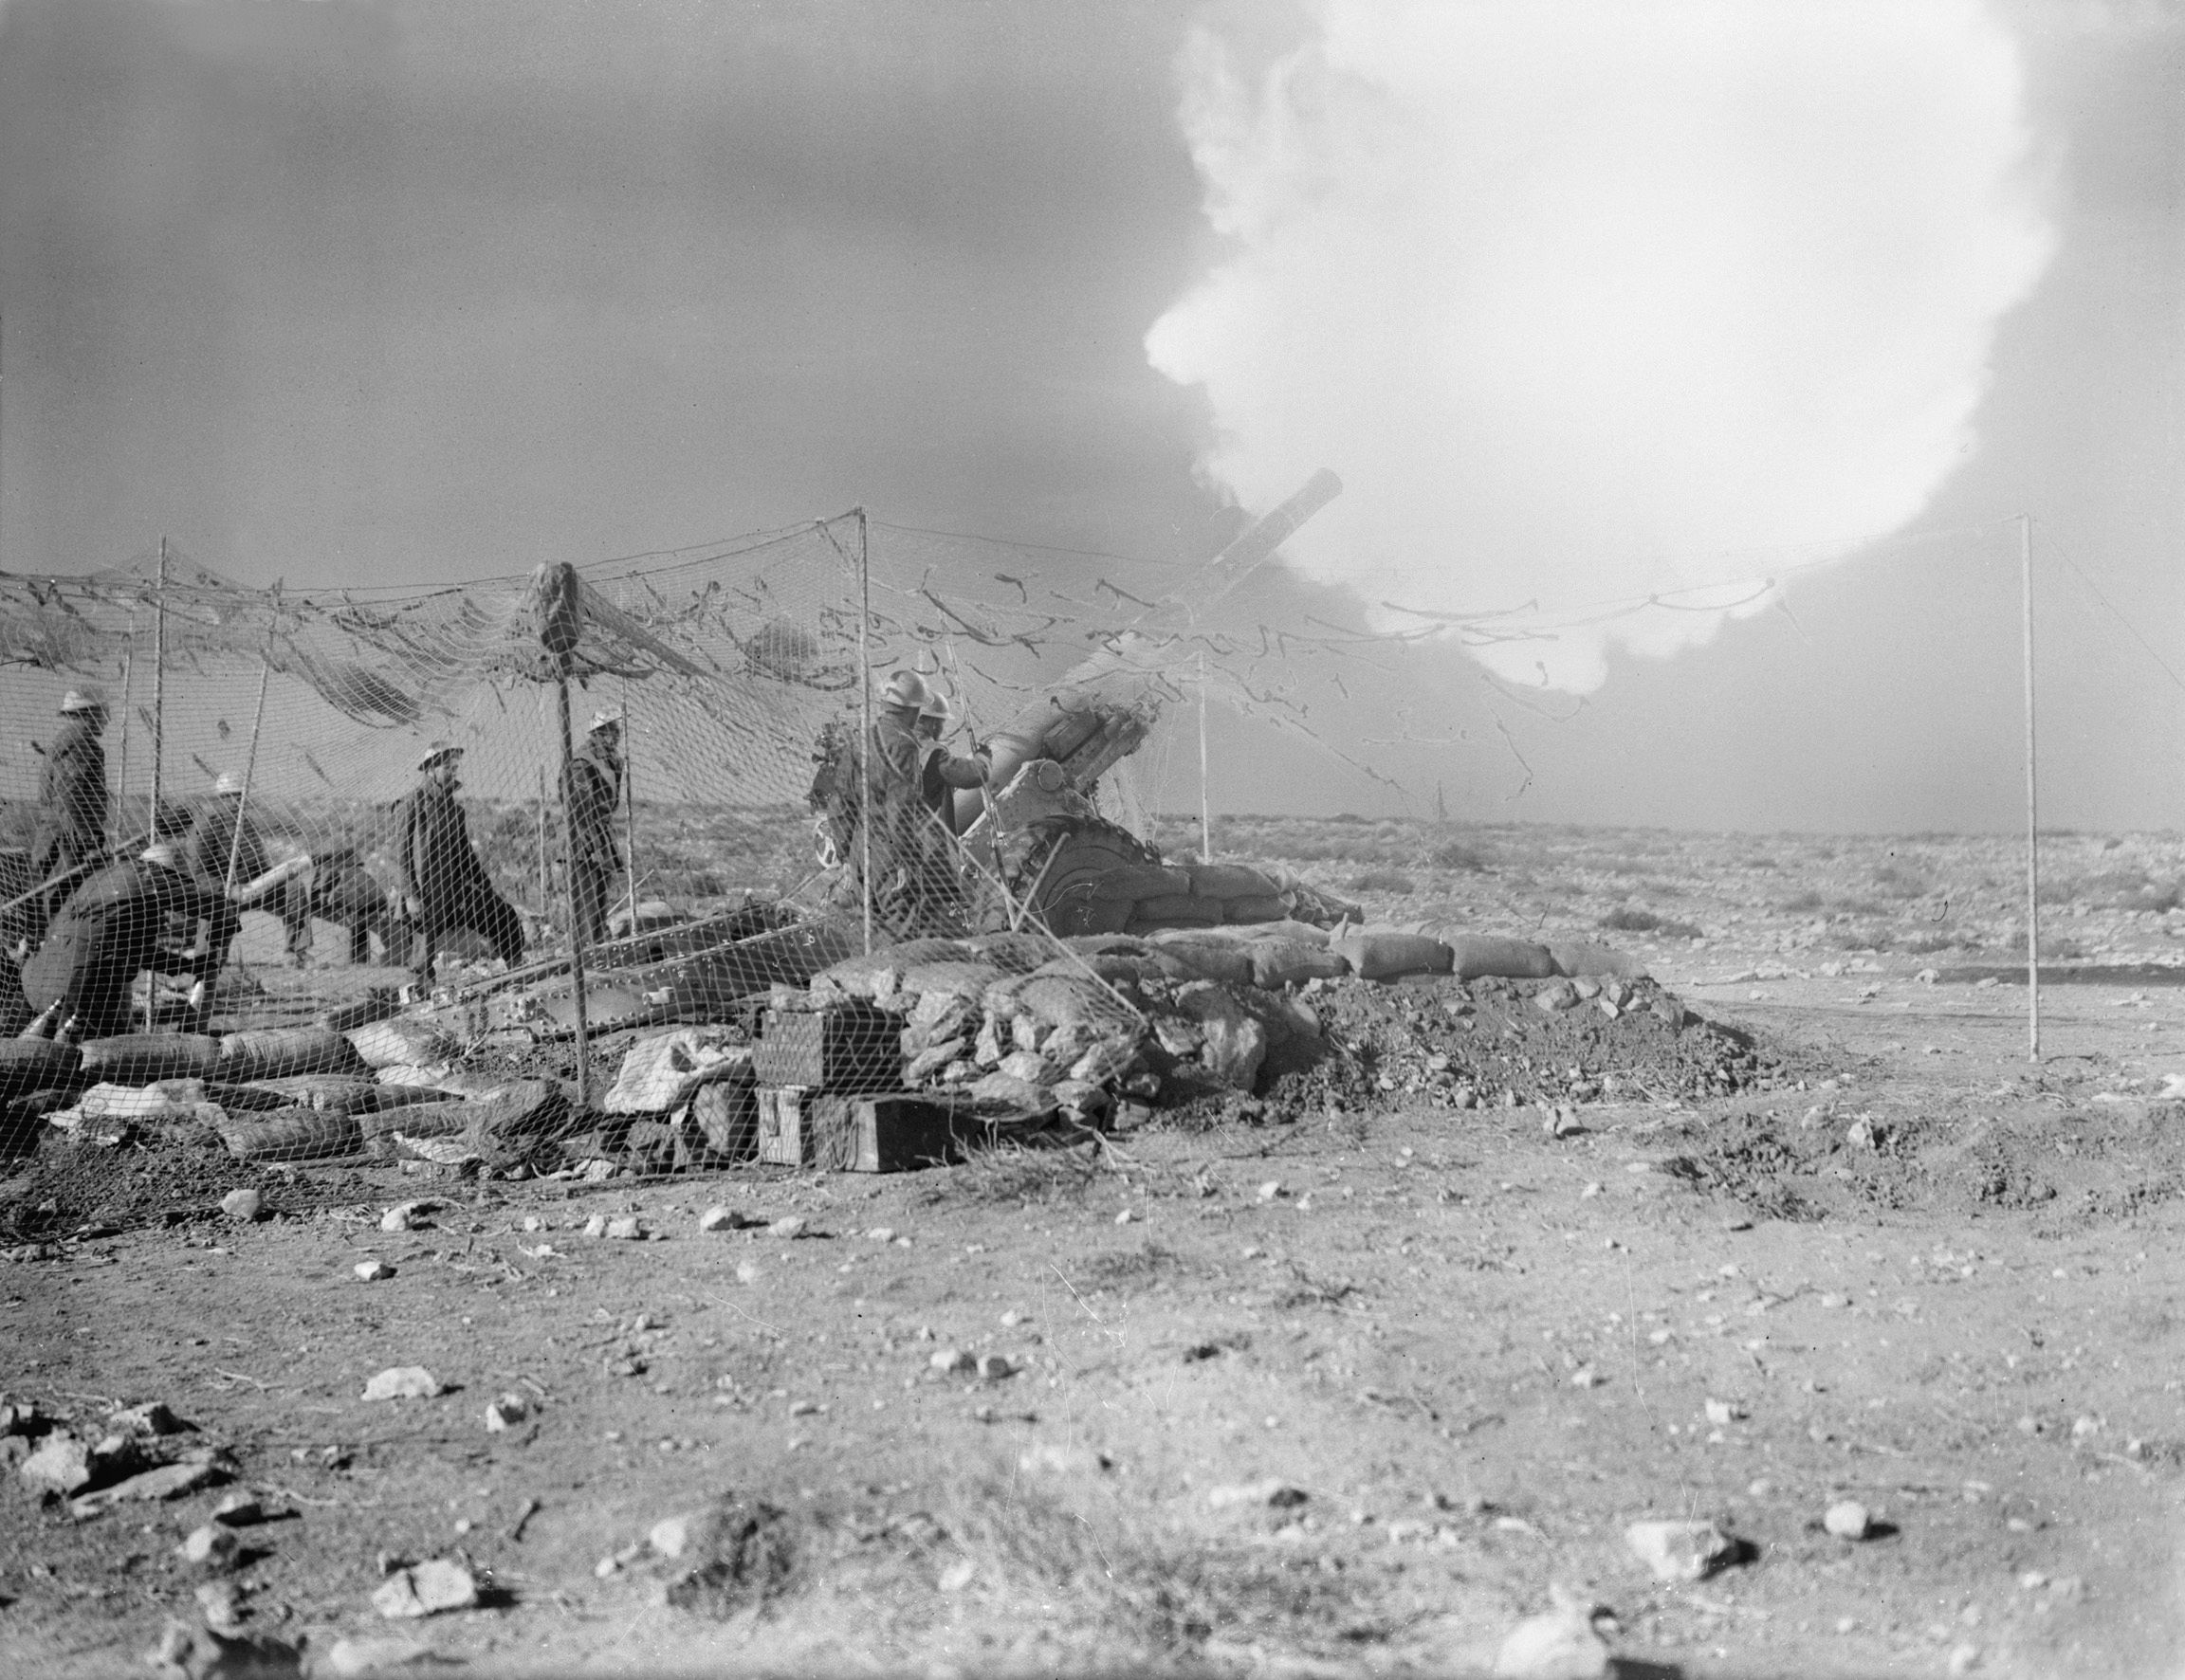 With a camouflage net draped above it, a British Bofors gun fires at Italian positions at Derna on February 1, 1941.